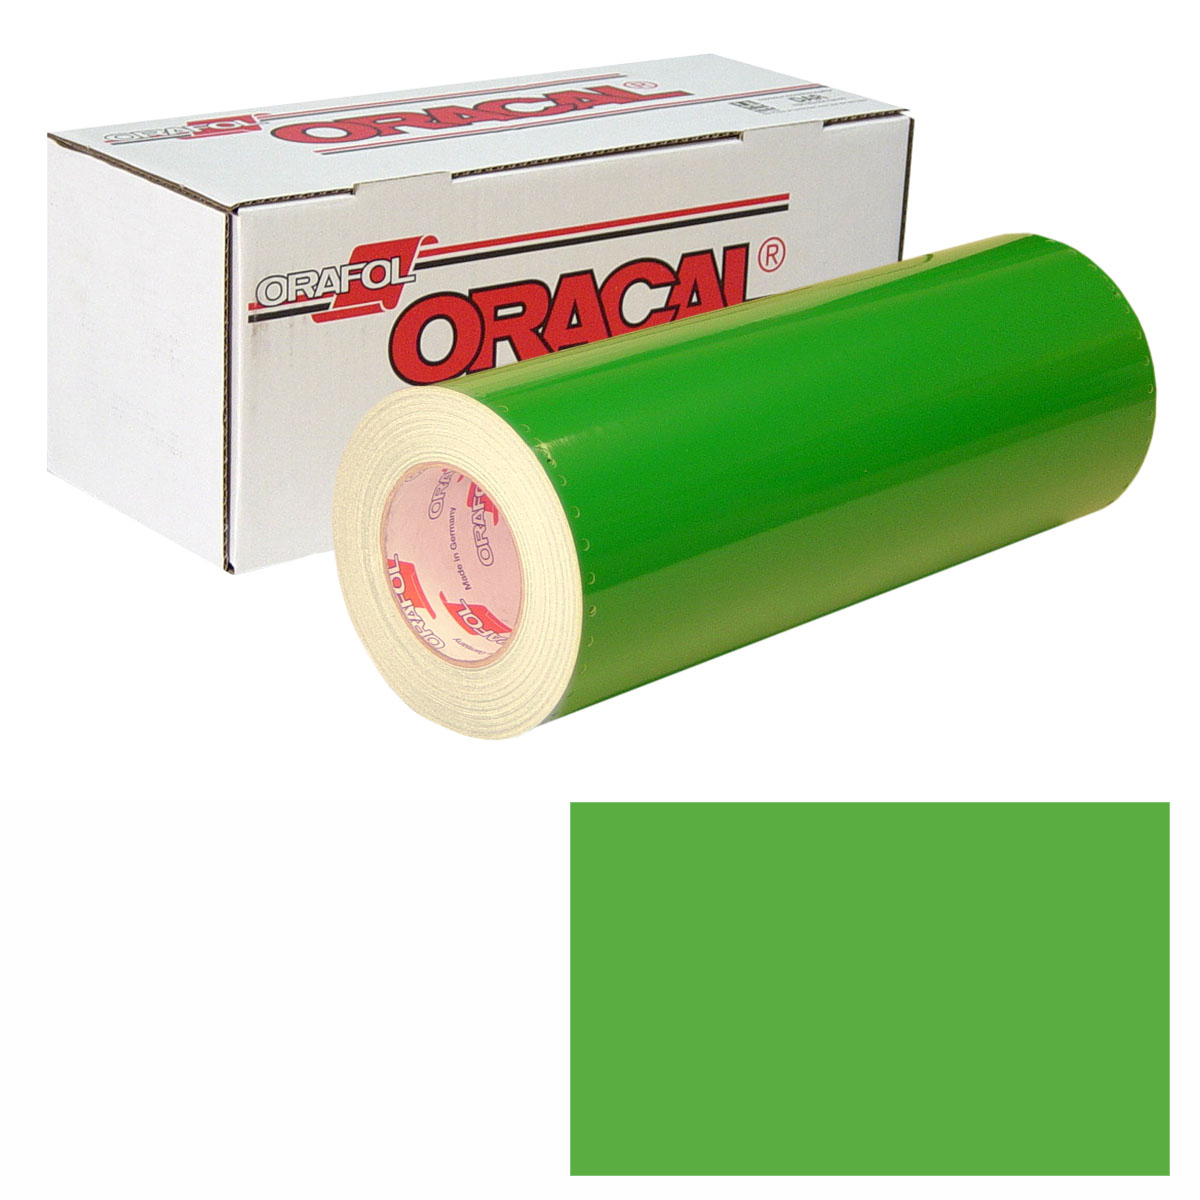 ORACAL 651 30in X 10yd 063 Lime-Tree Green